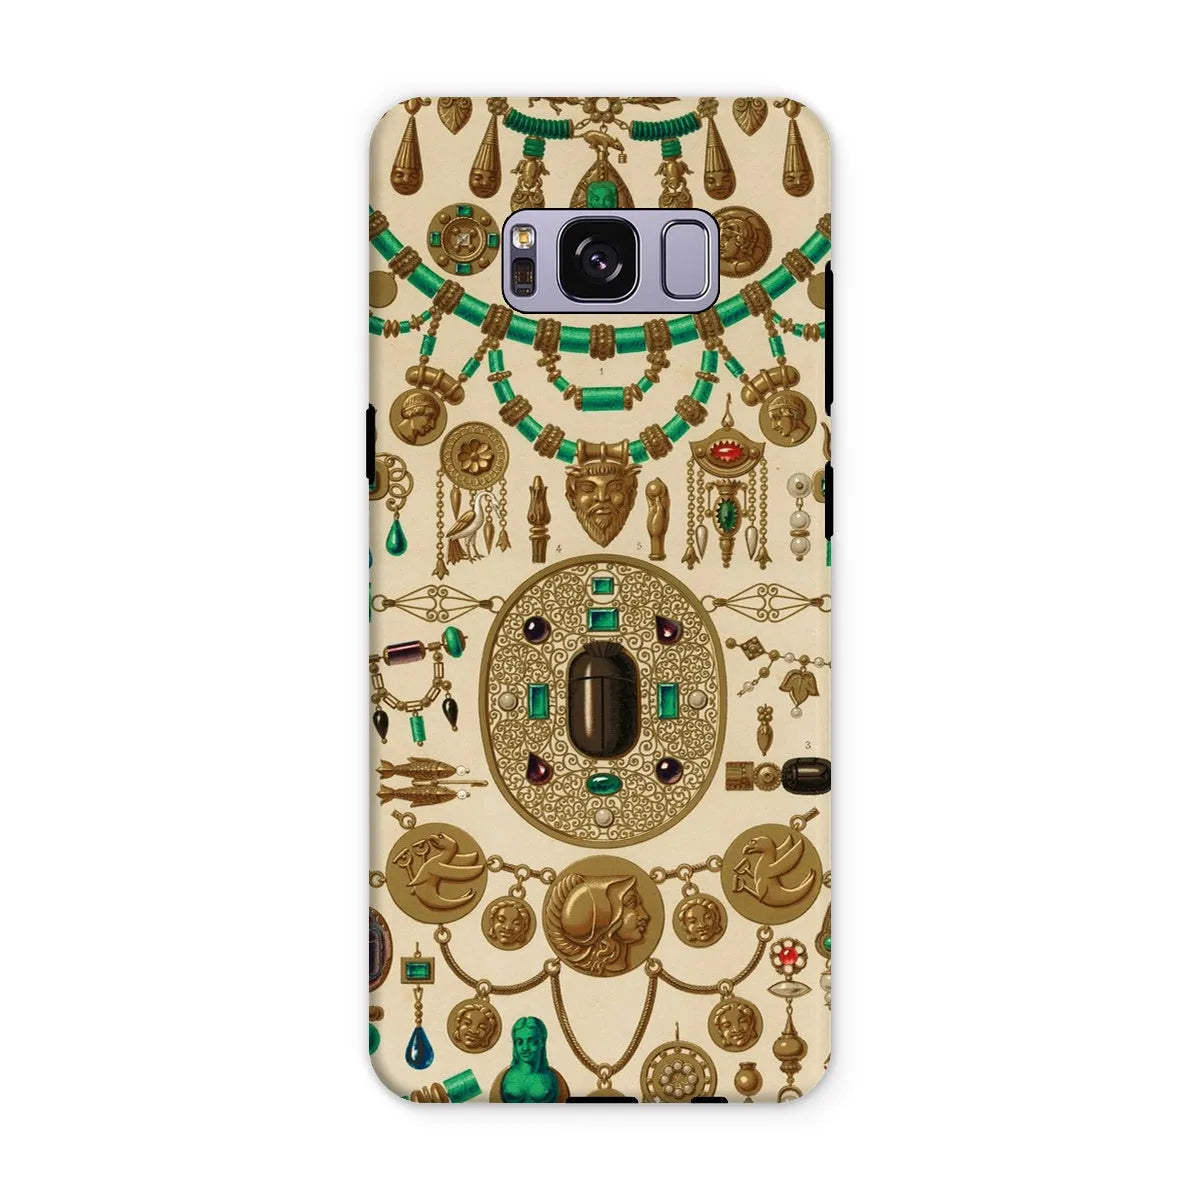 Etruscan Jewelry By Auguste Racinet Art Phone Case - Samsung Galaxy S8 Plus / Matte - Mobile Phone Cases - Aesthetic Art